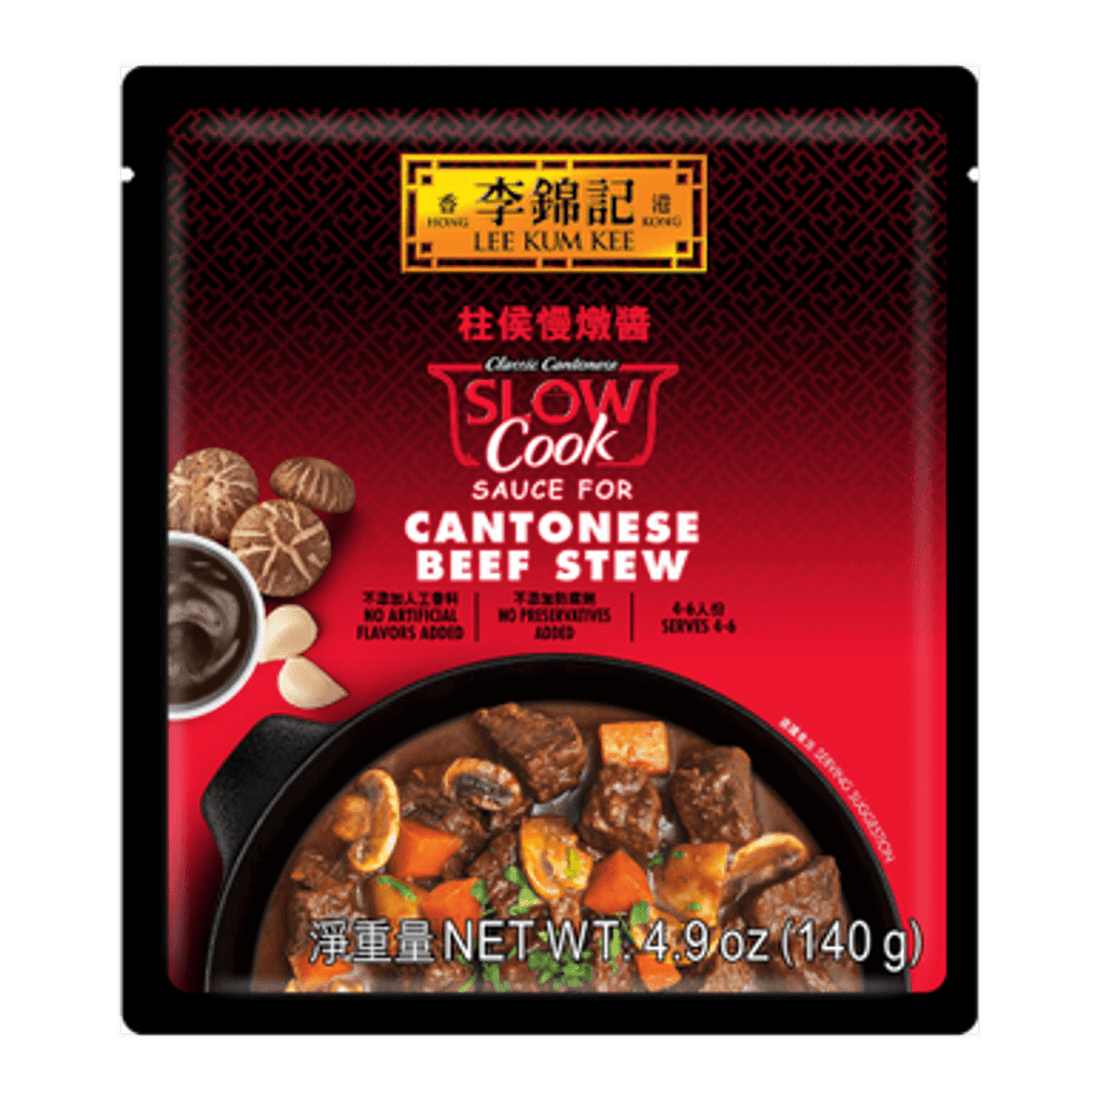 Lee Kum Kee Slow Cook Sauce for Cantonese Beef 4.9oz(140g) - Anytime Basket